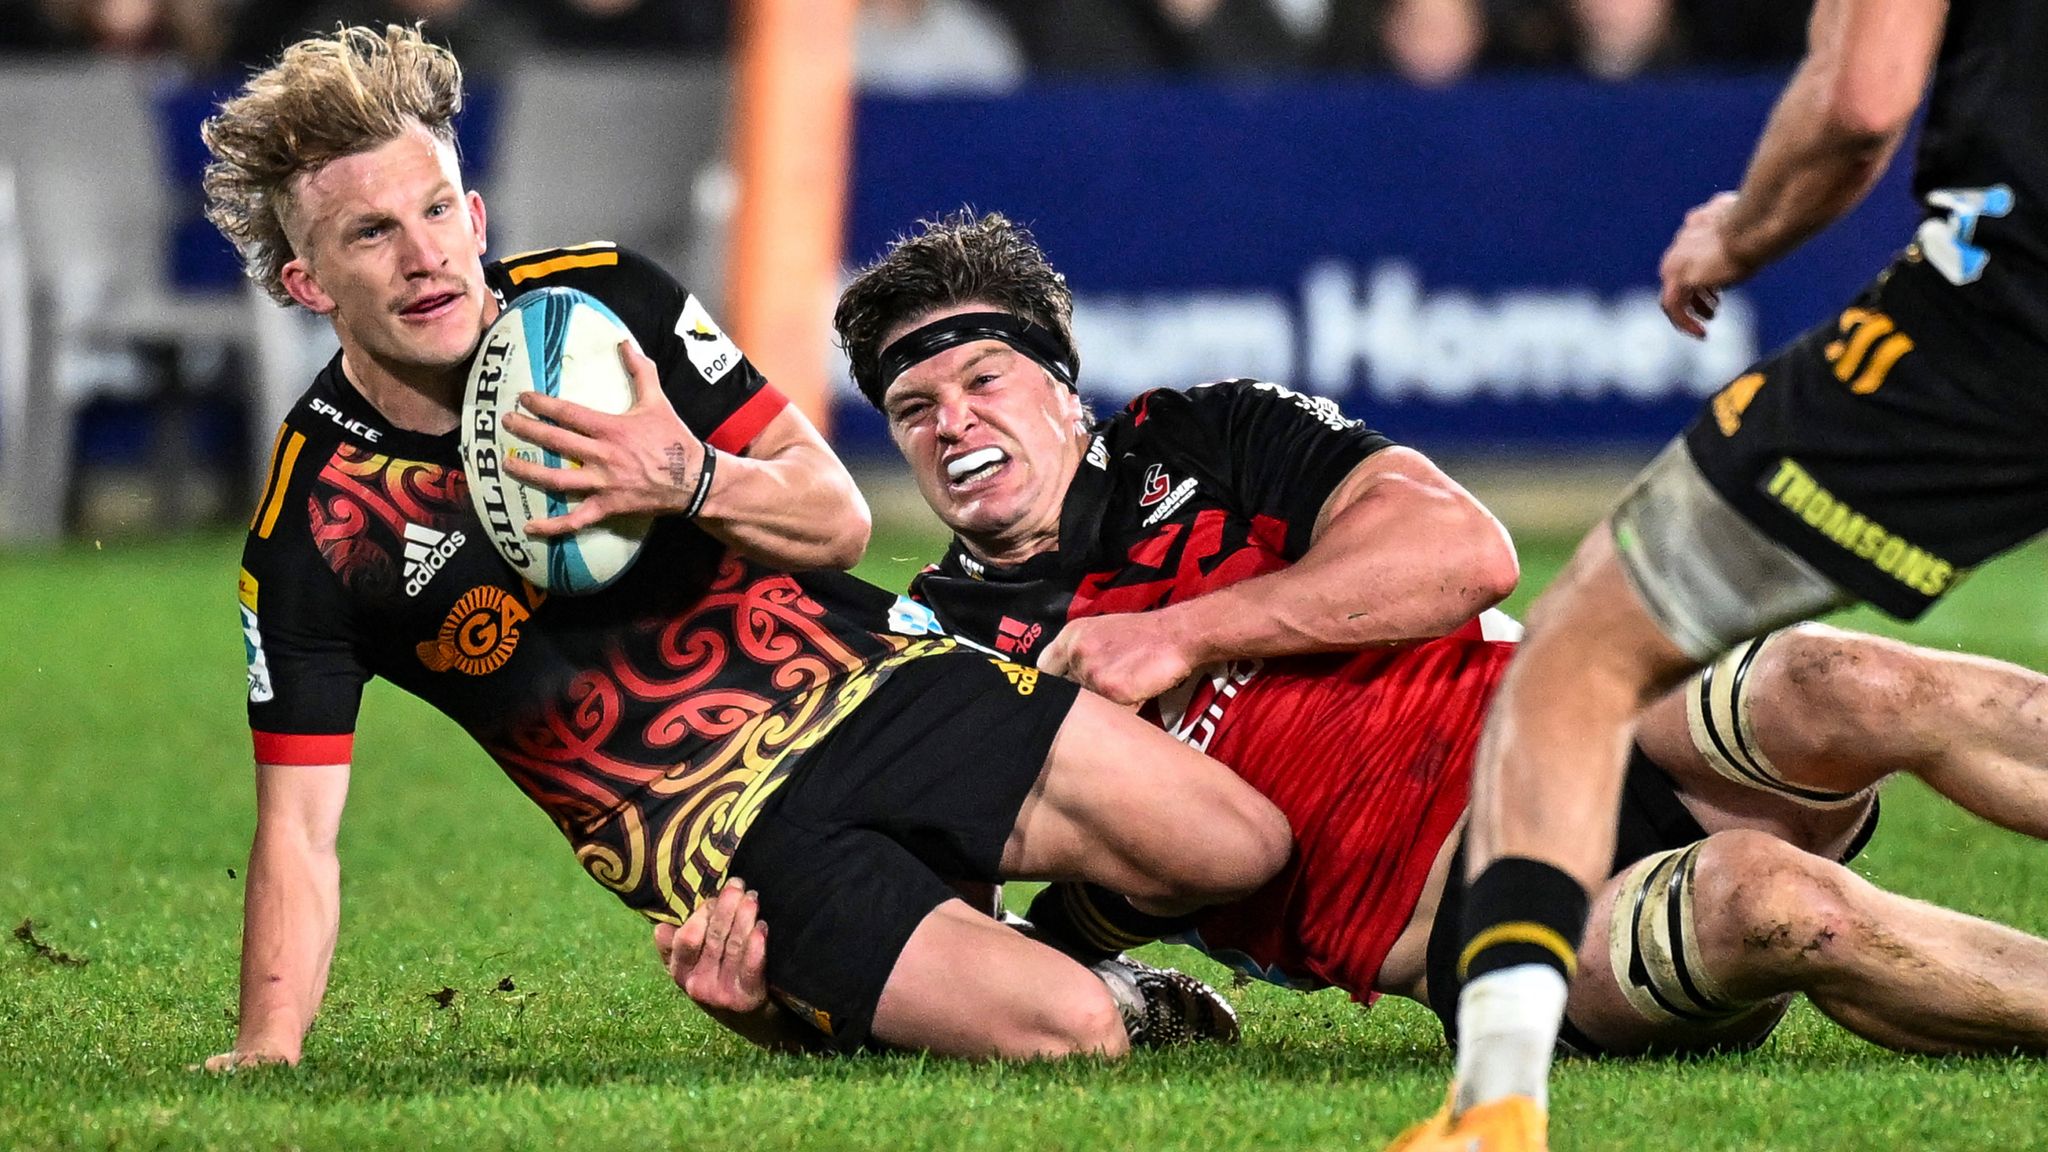 Super Rugby Pacific final Crusaders claim 25-20 victory over Chiefs to win seventh straight title Rugby Union News Sky Sports